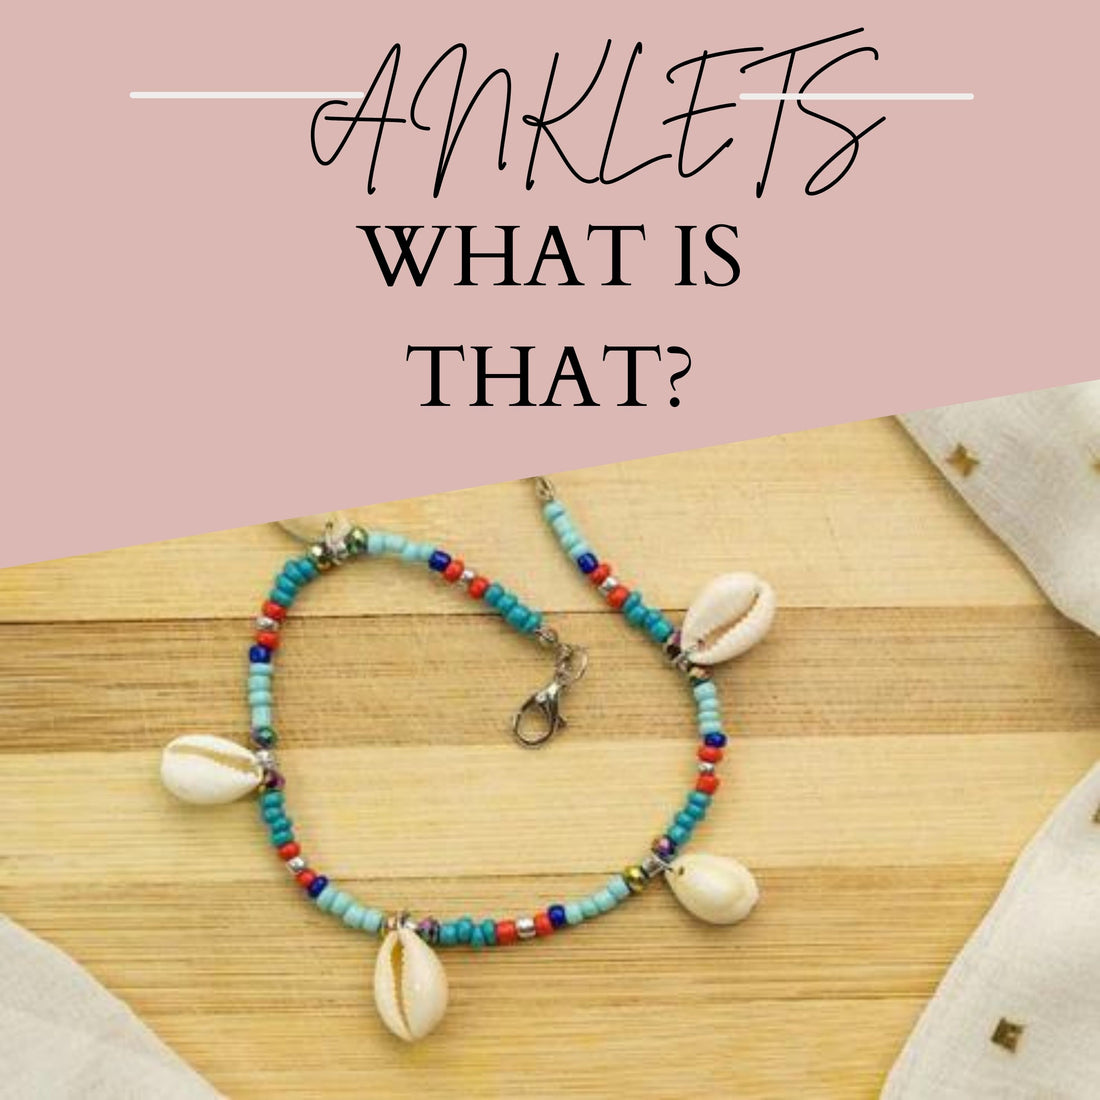 What is an Anklet